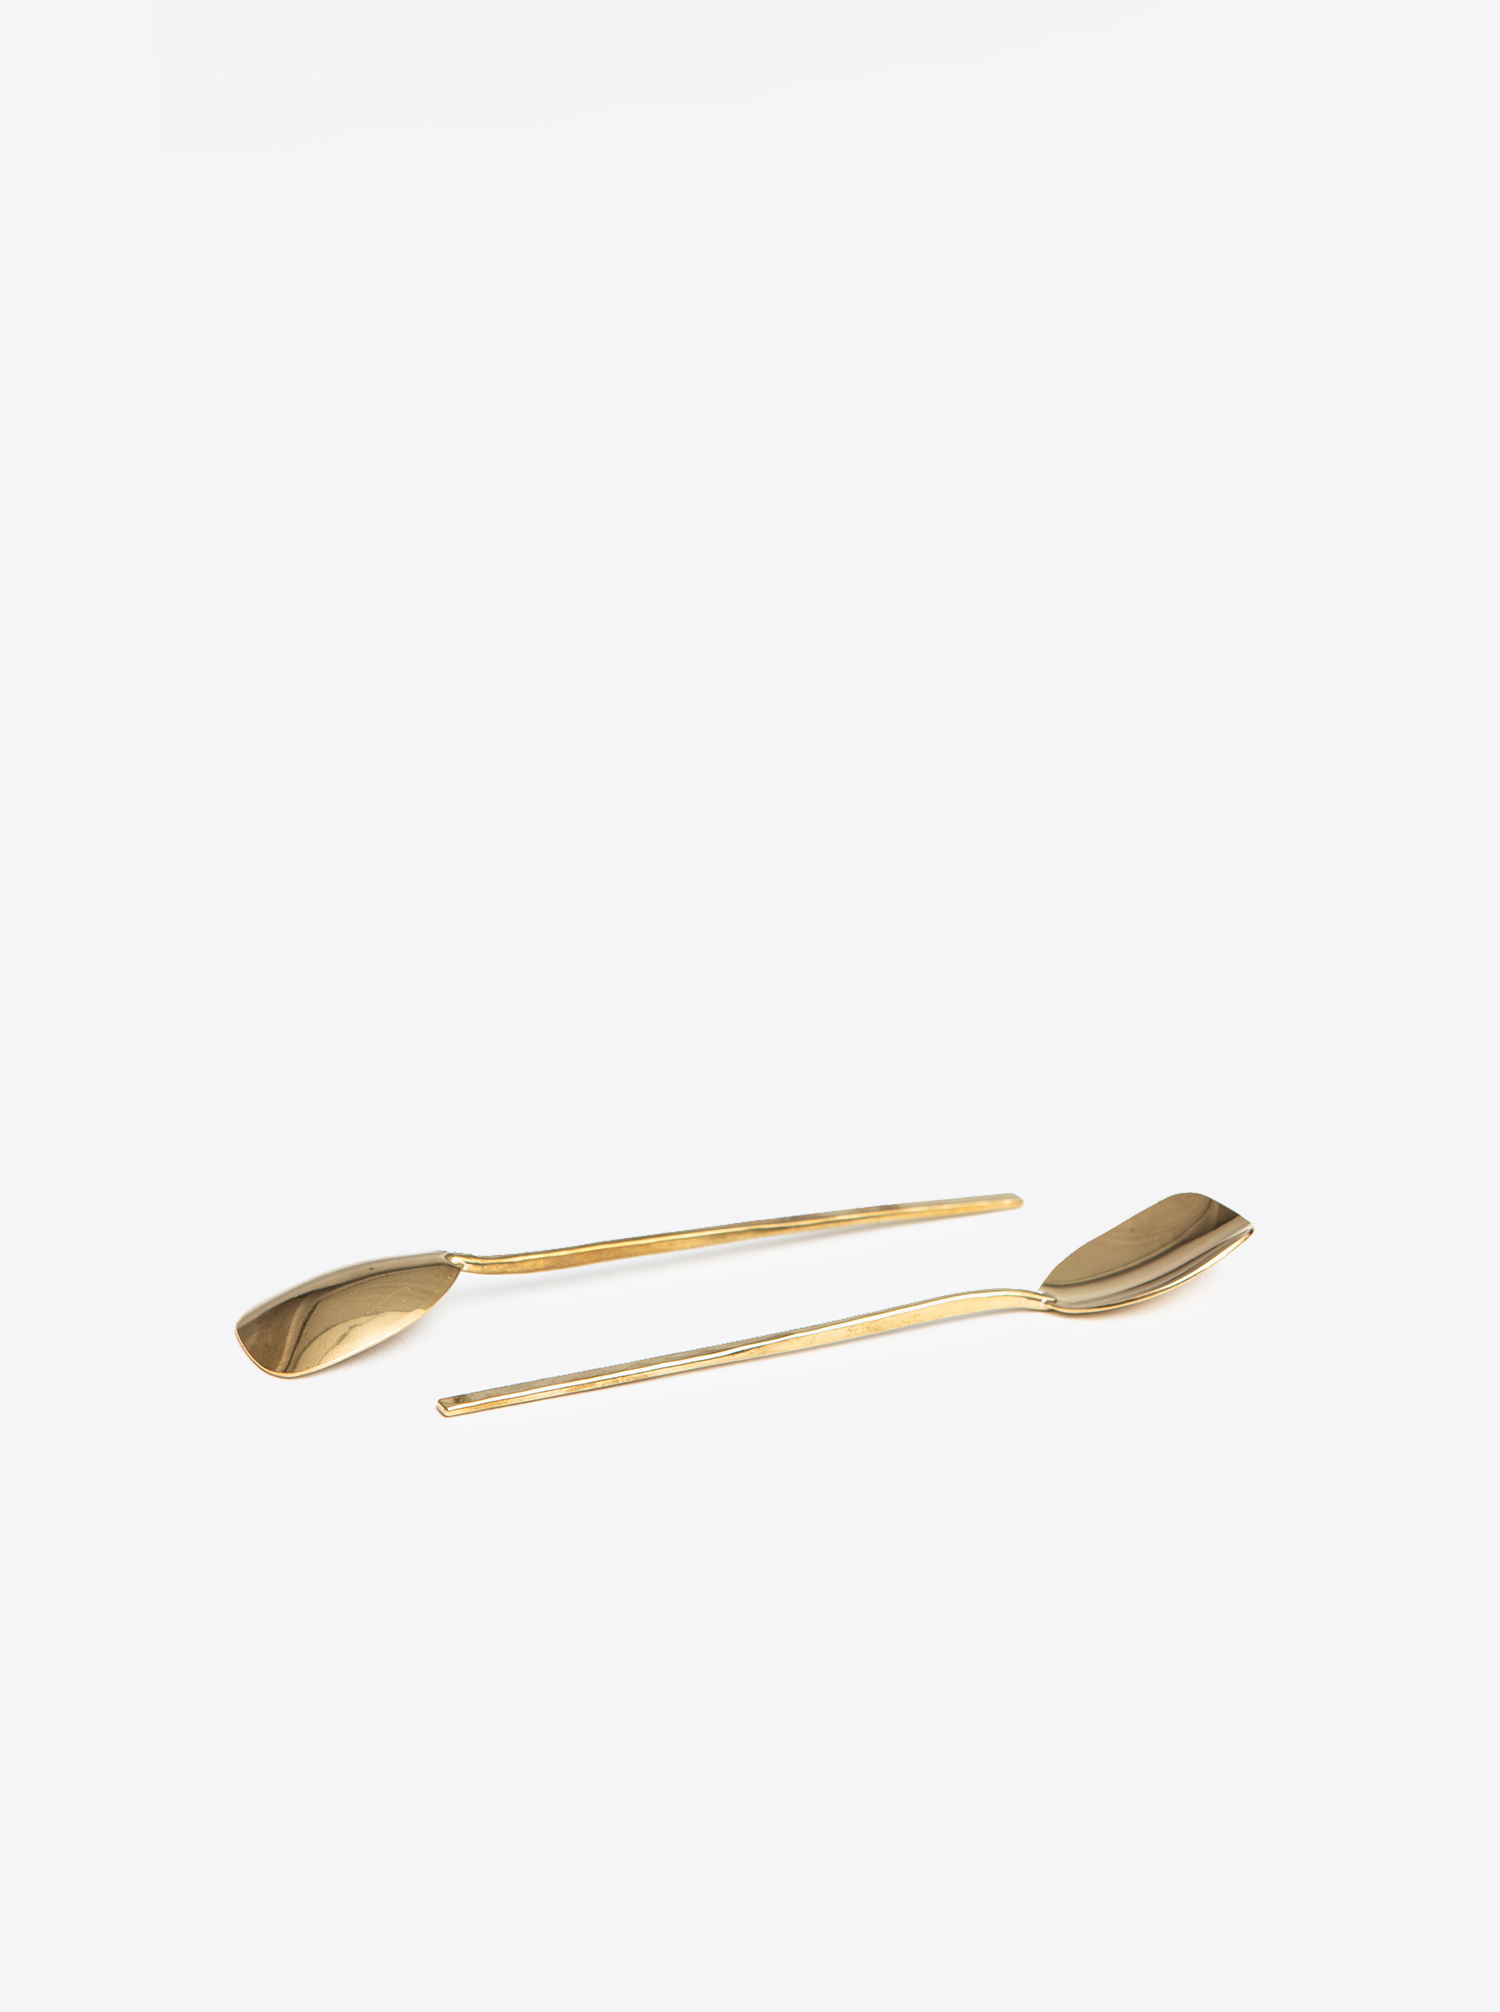 Soft Ice Spoon in Brass